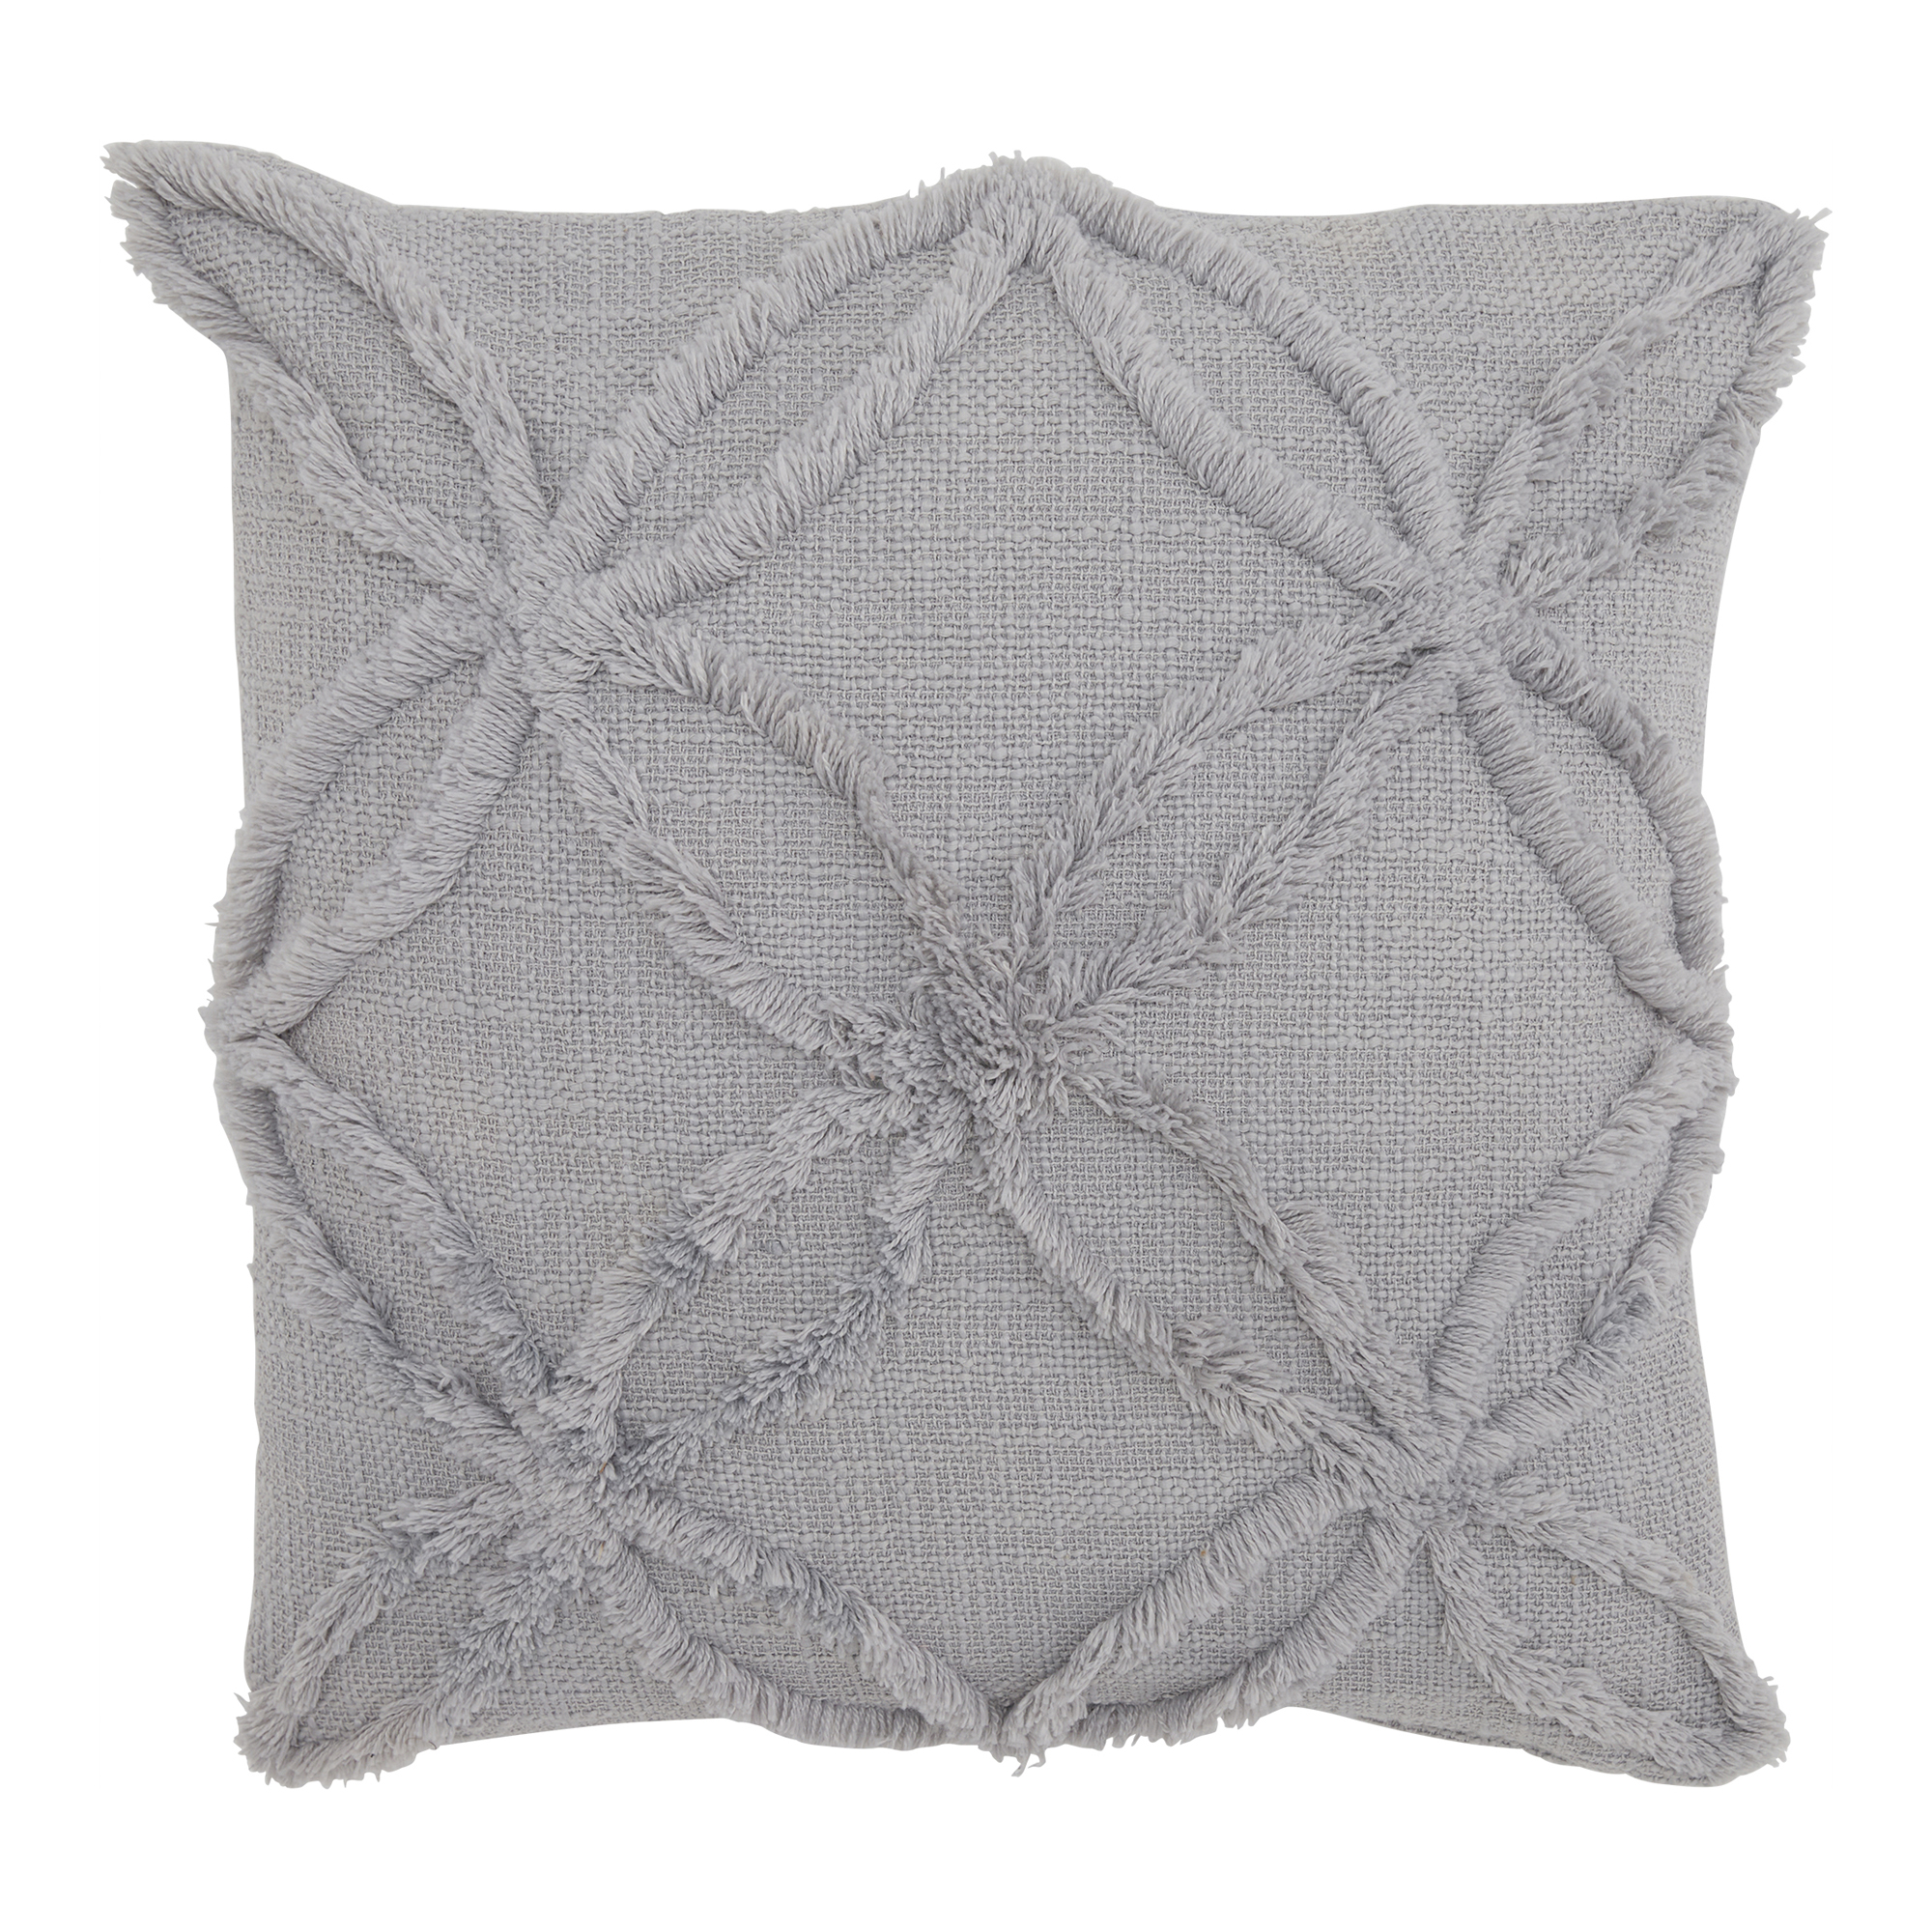 Flora Grey Recycled Plastic Cushion, Square | Barker & Stonehouse